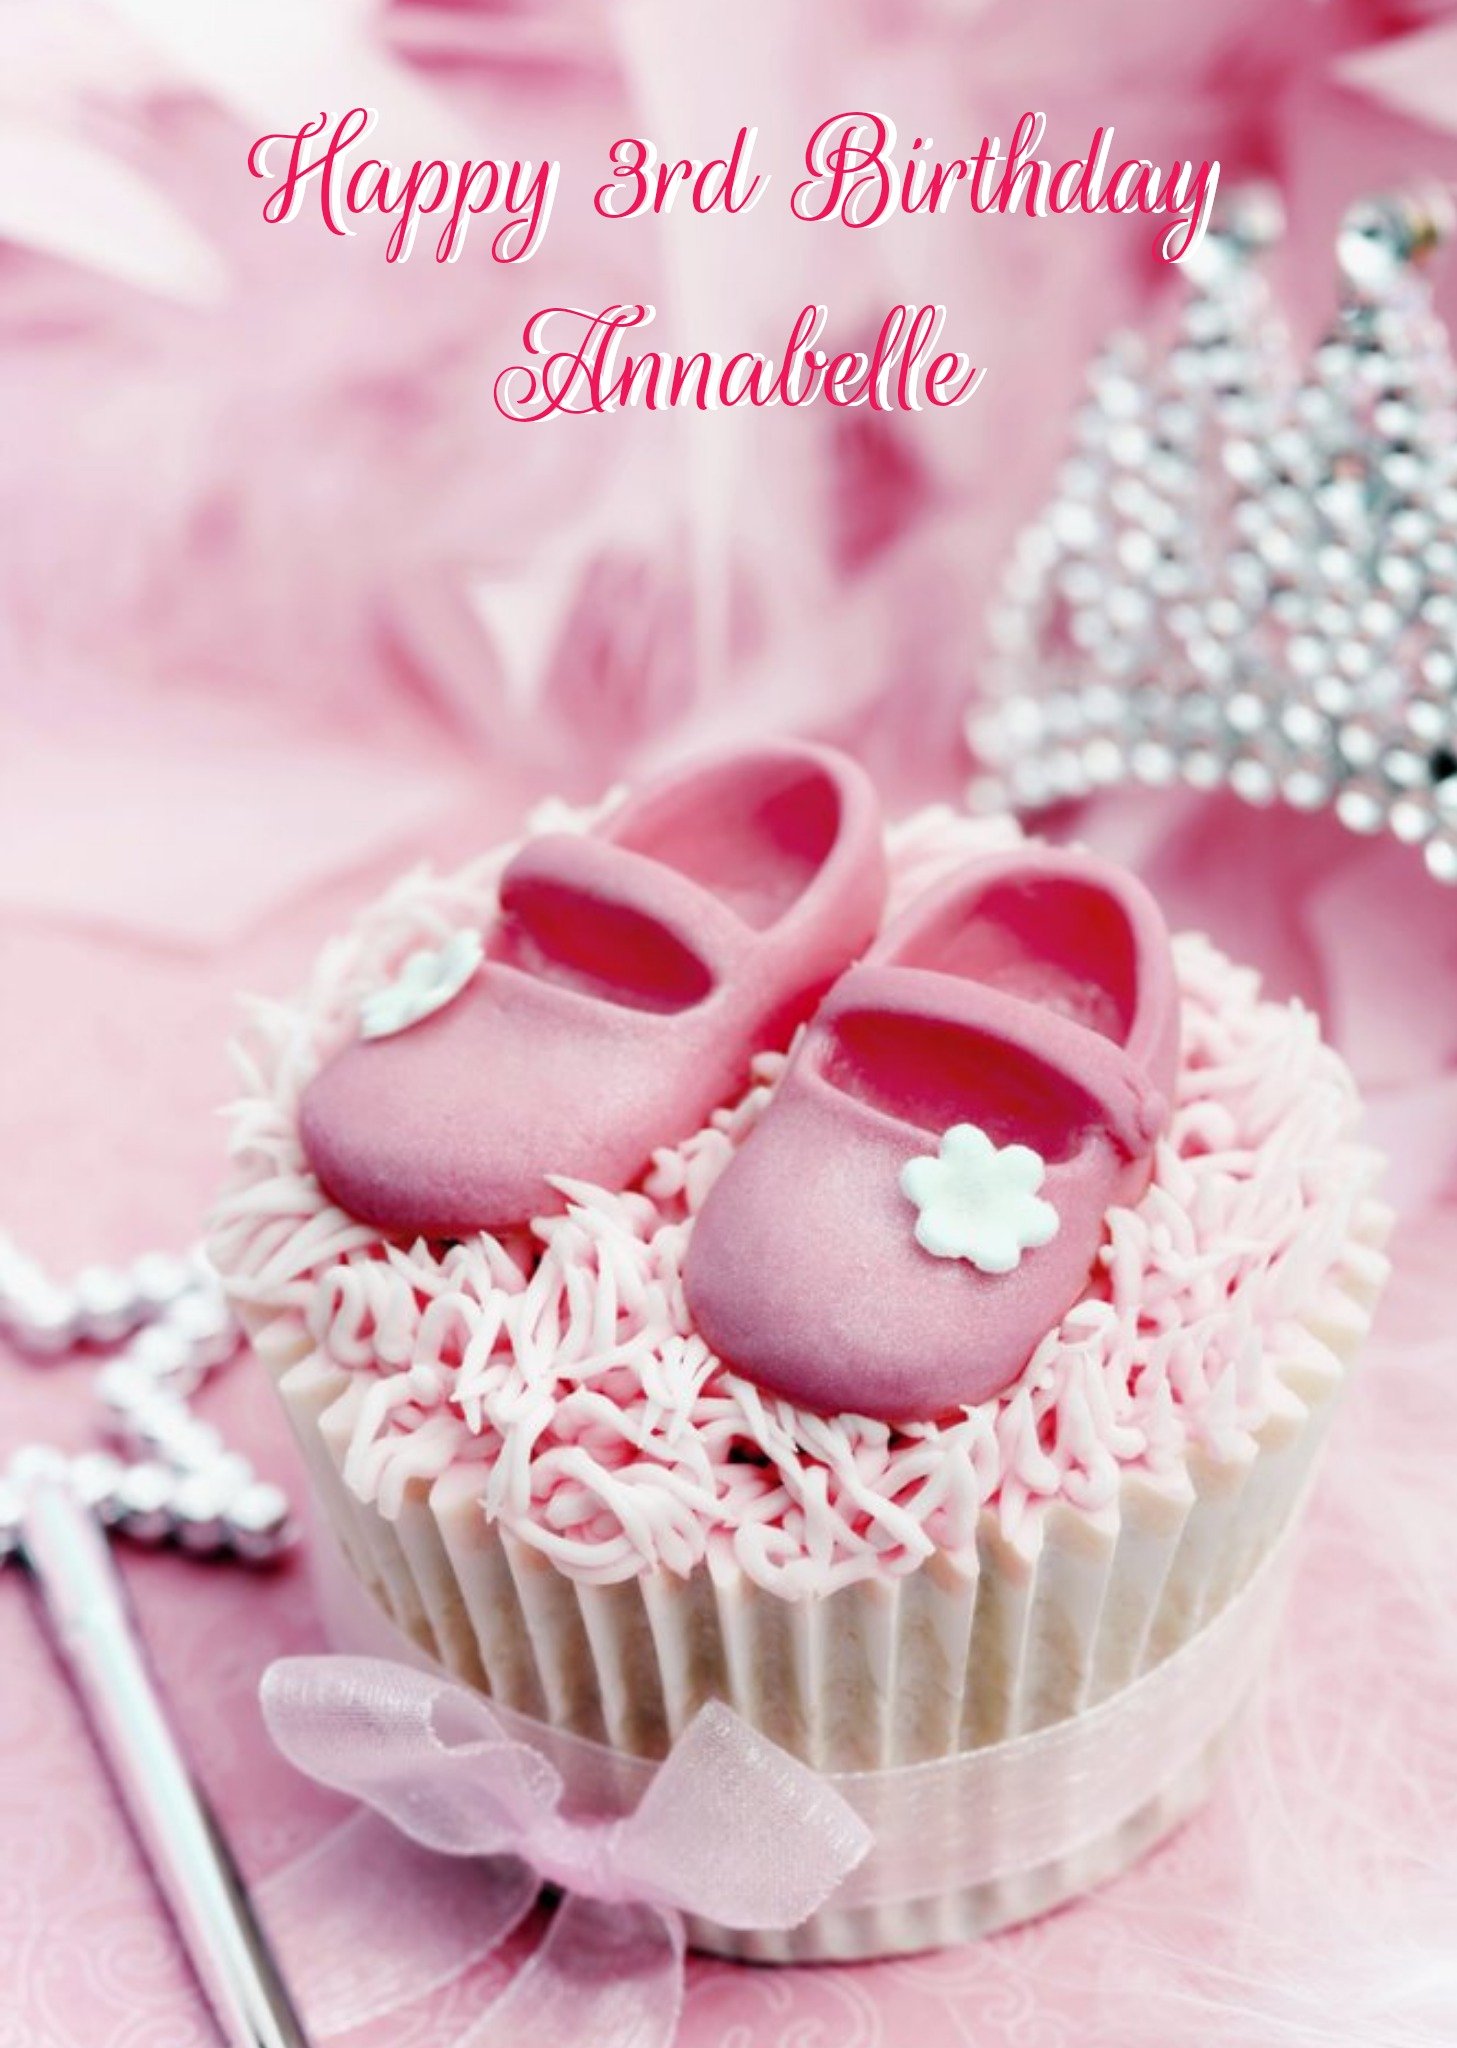 Moonpig Pink Shoes On Cupcake Personalised Happy 3rd Birthday Card Ecard